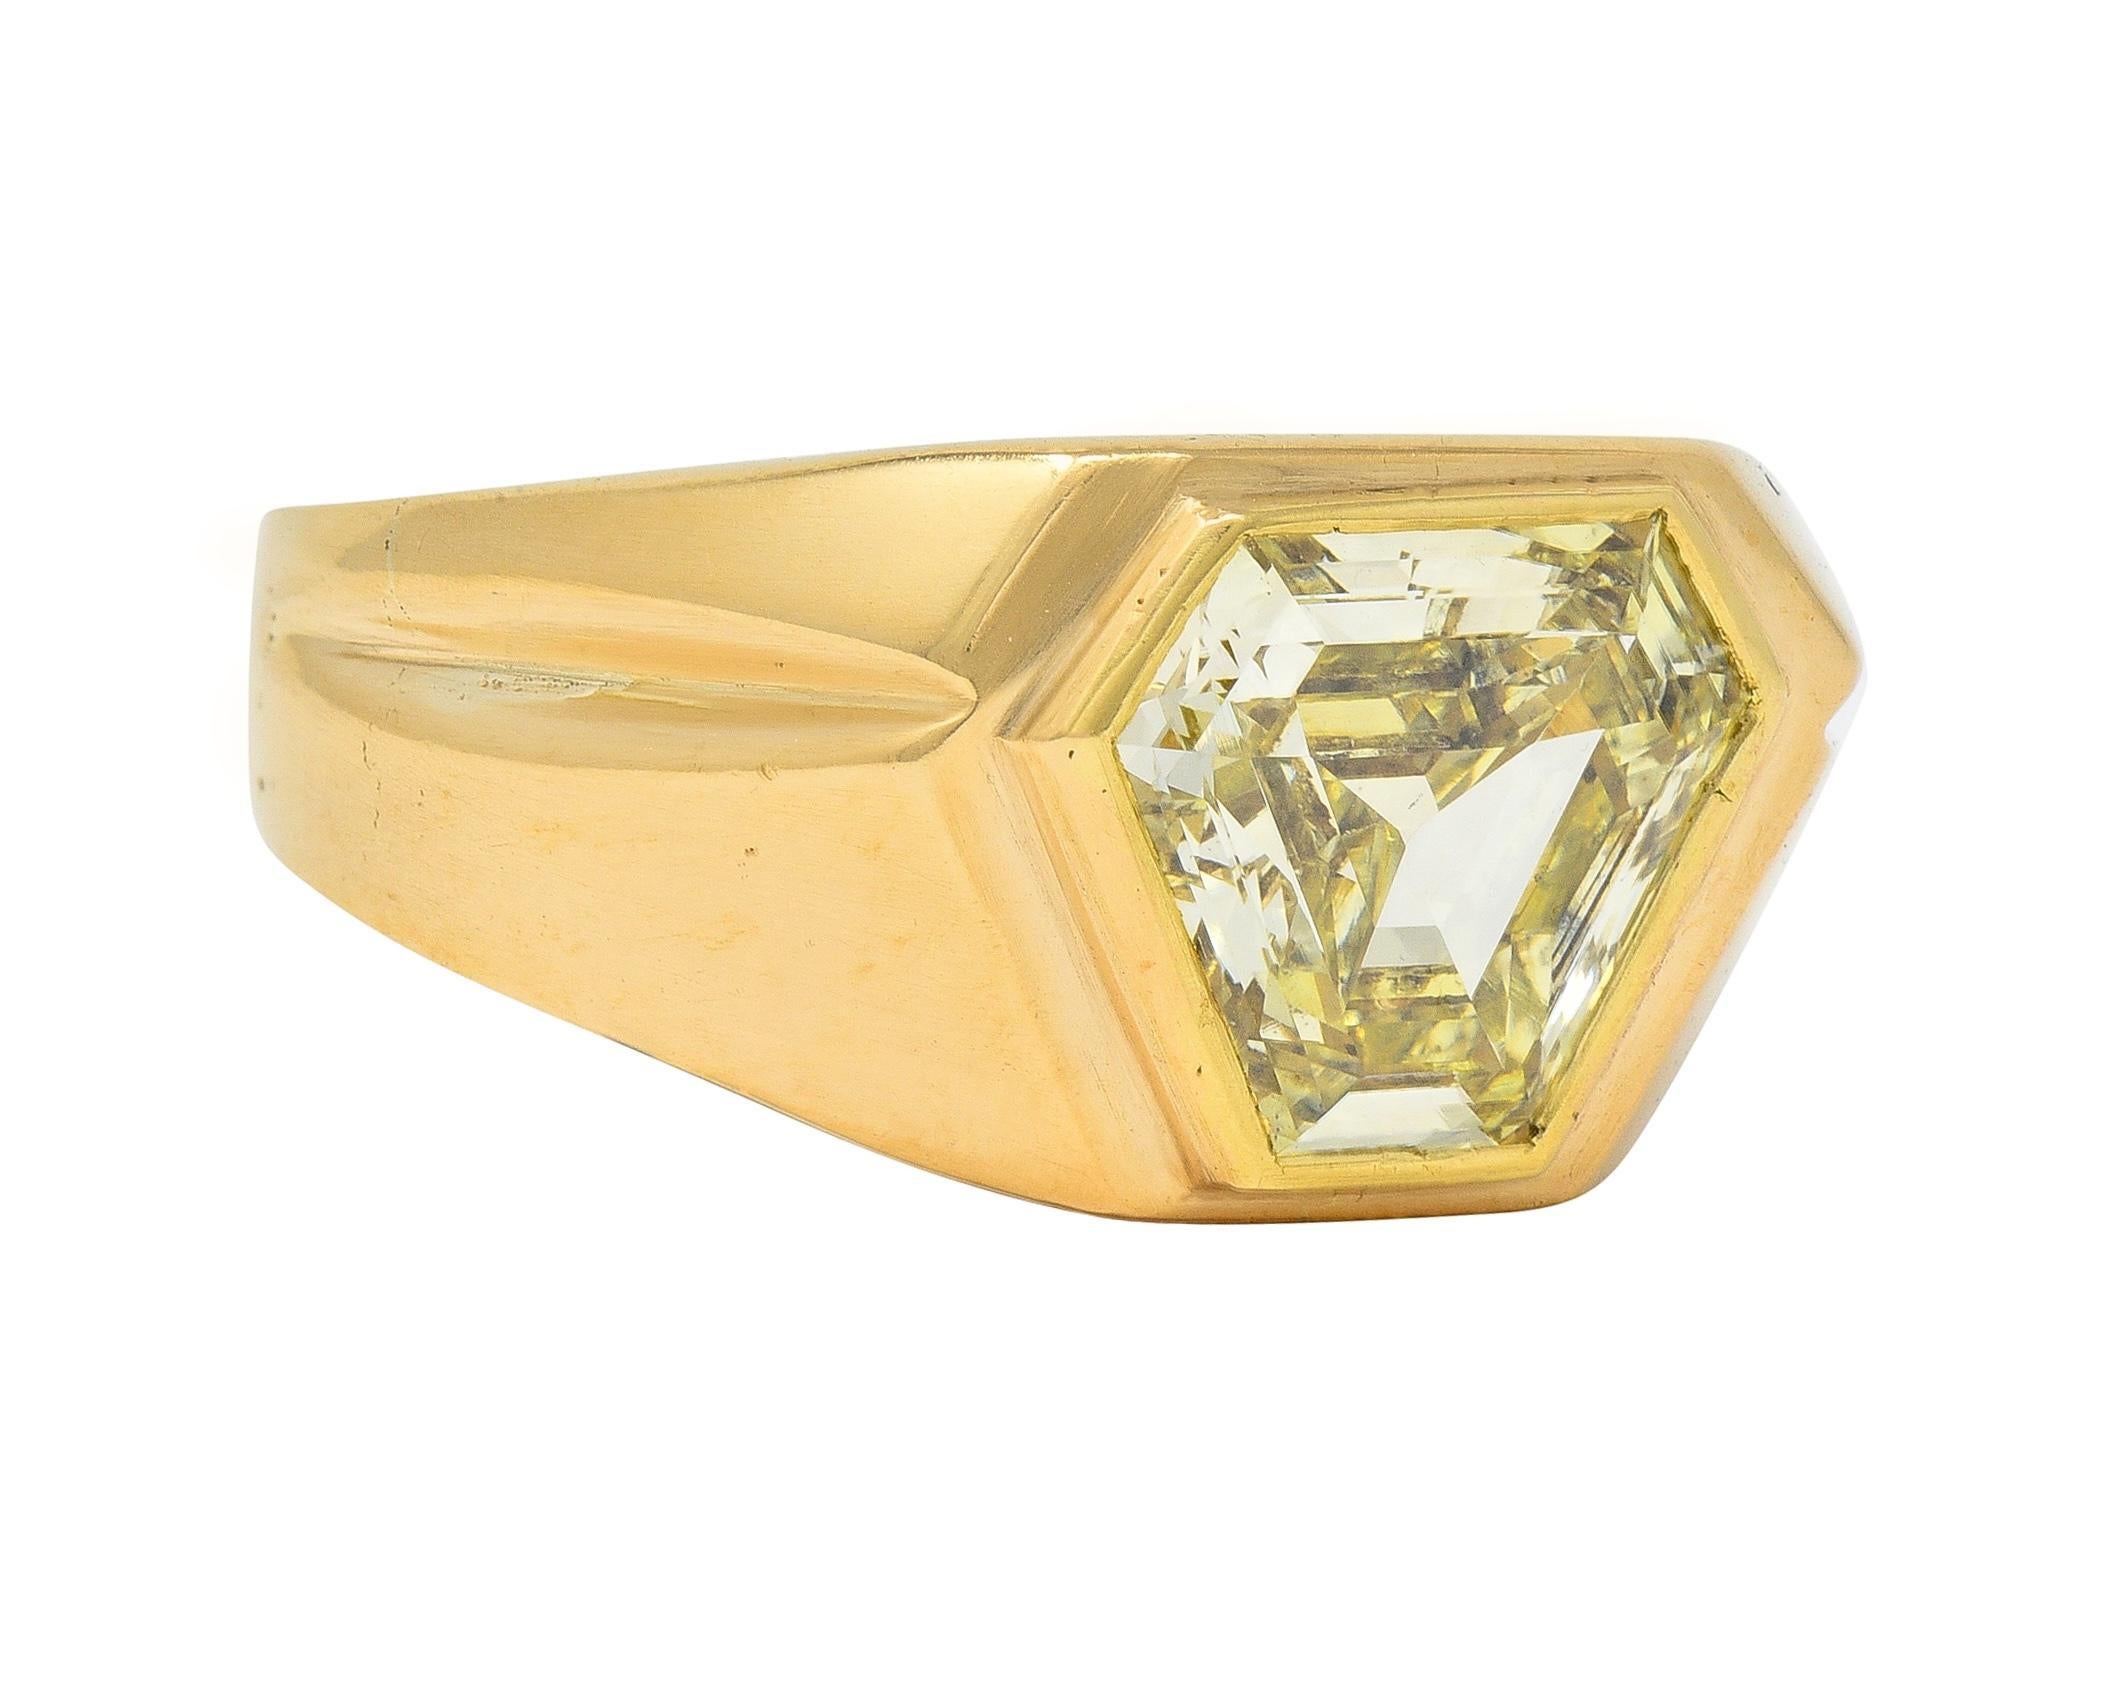 Centering a hexagonal step-cut diamond weighing 2.44 carats 
Transparent, natural Fancy Yellow in color with SI1 clarity
Set in a raised bezel with contoured surround 
Flanked by pleated shoulders 
Tested as 14 karat gold 
Circa: 1960s
Ring size: 7